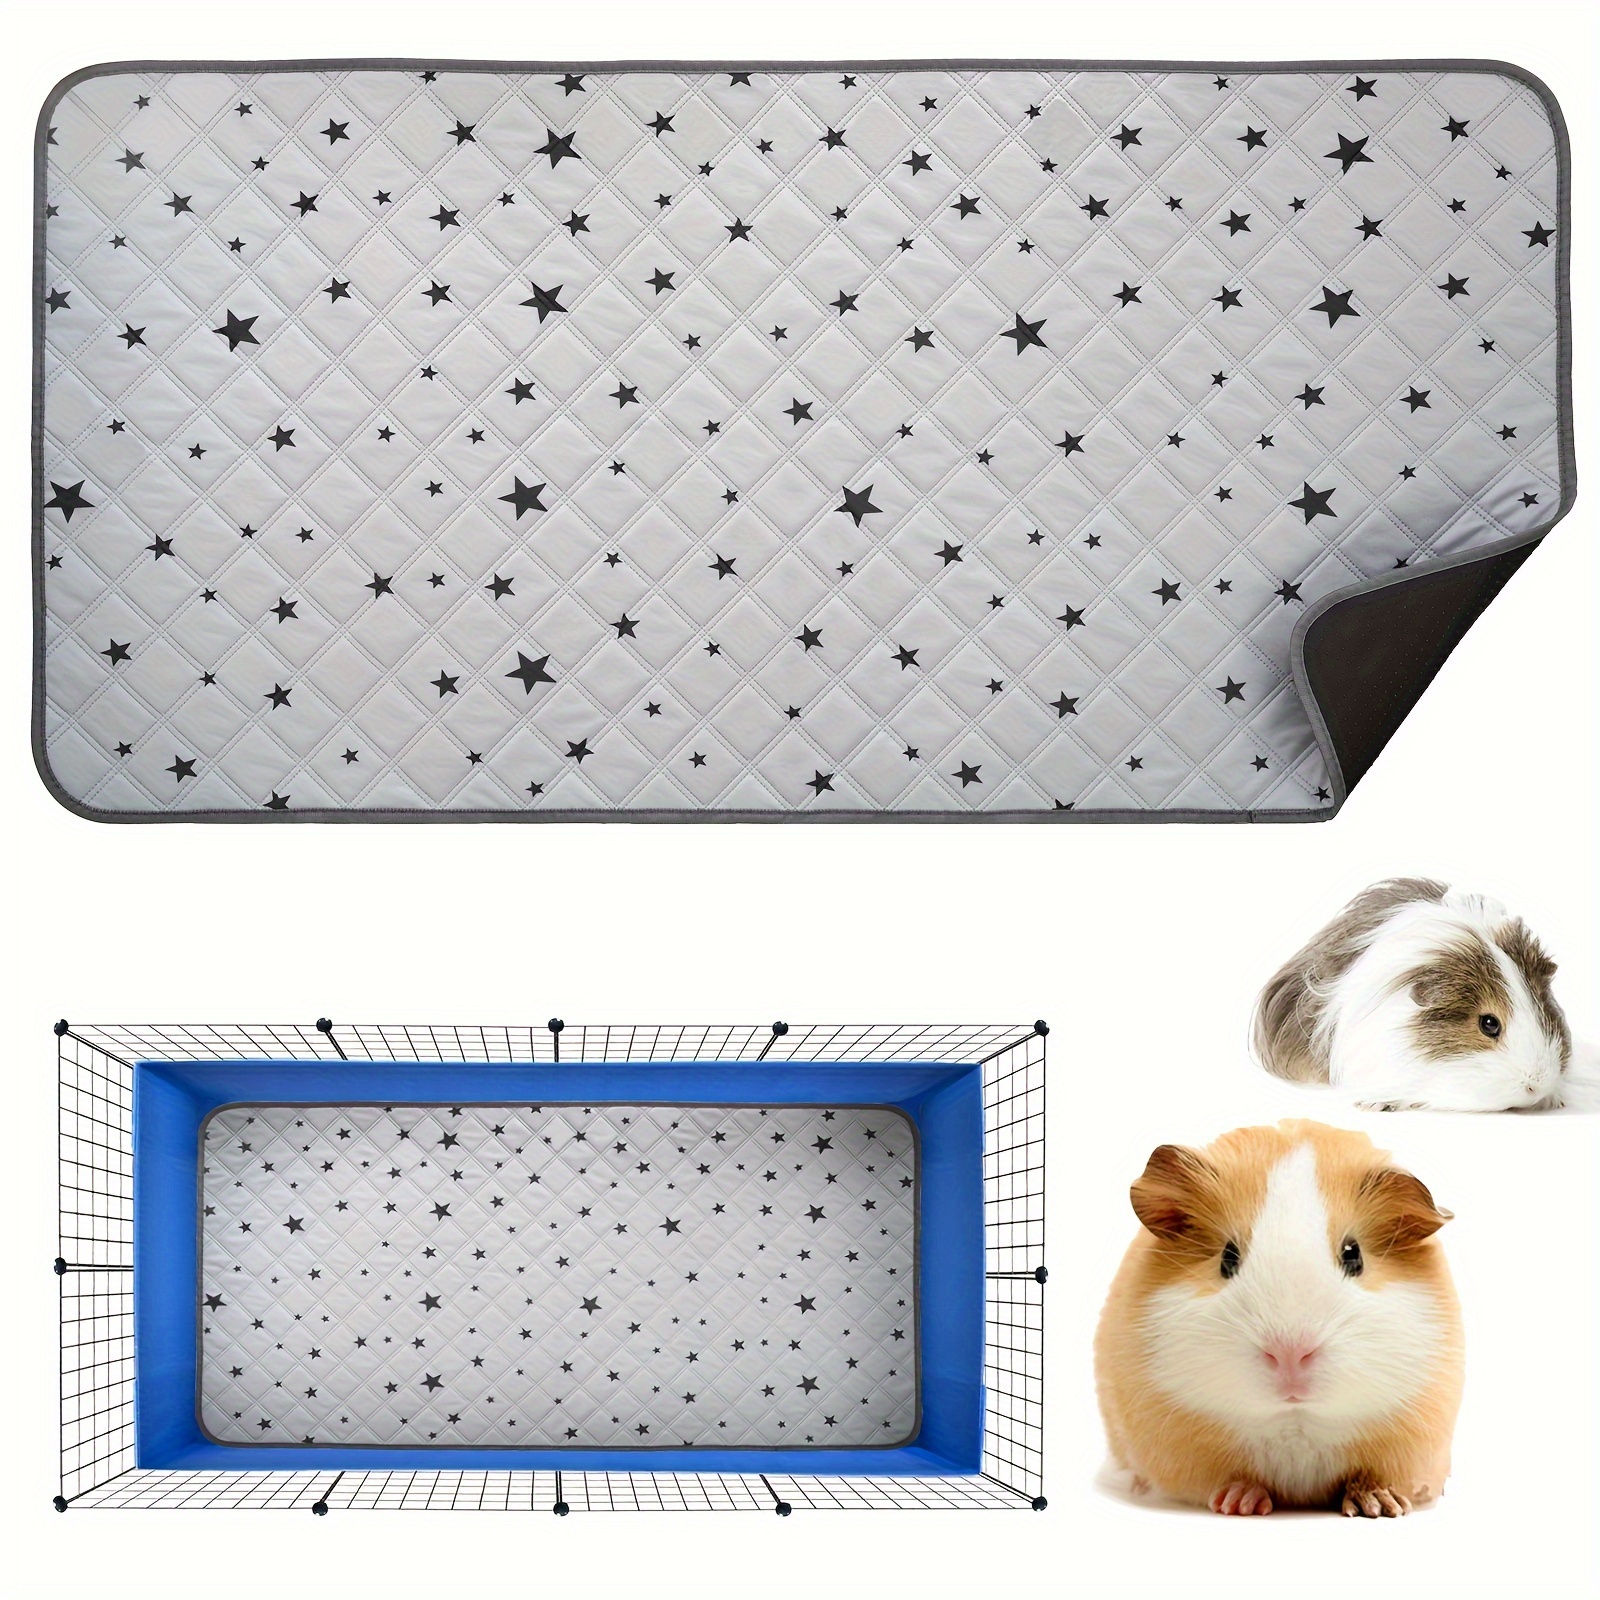 

Star Print Guinea Hamster Cage Liners - Washable Small Pet Pee Pads, Waterproof Reusable & Anti Slip Guinea Hamster Bedding, Fast And Super Absorbent Pee Pad For Small Animals Rabbit Hamster Rat